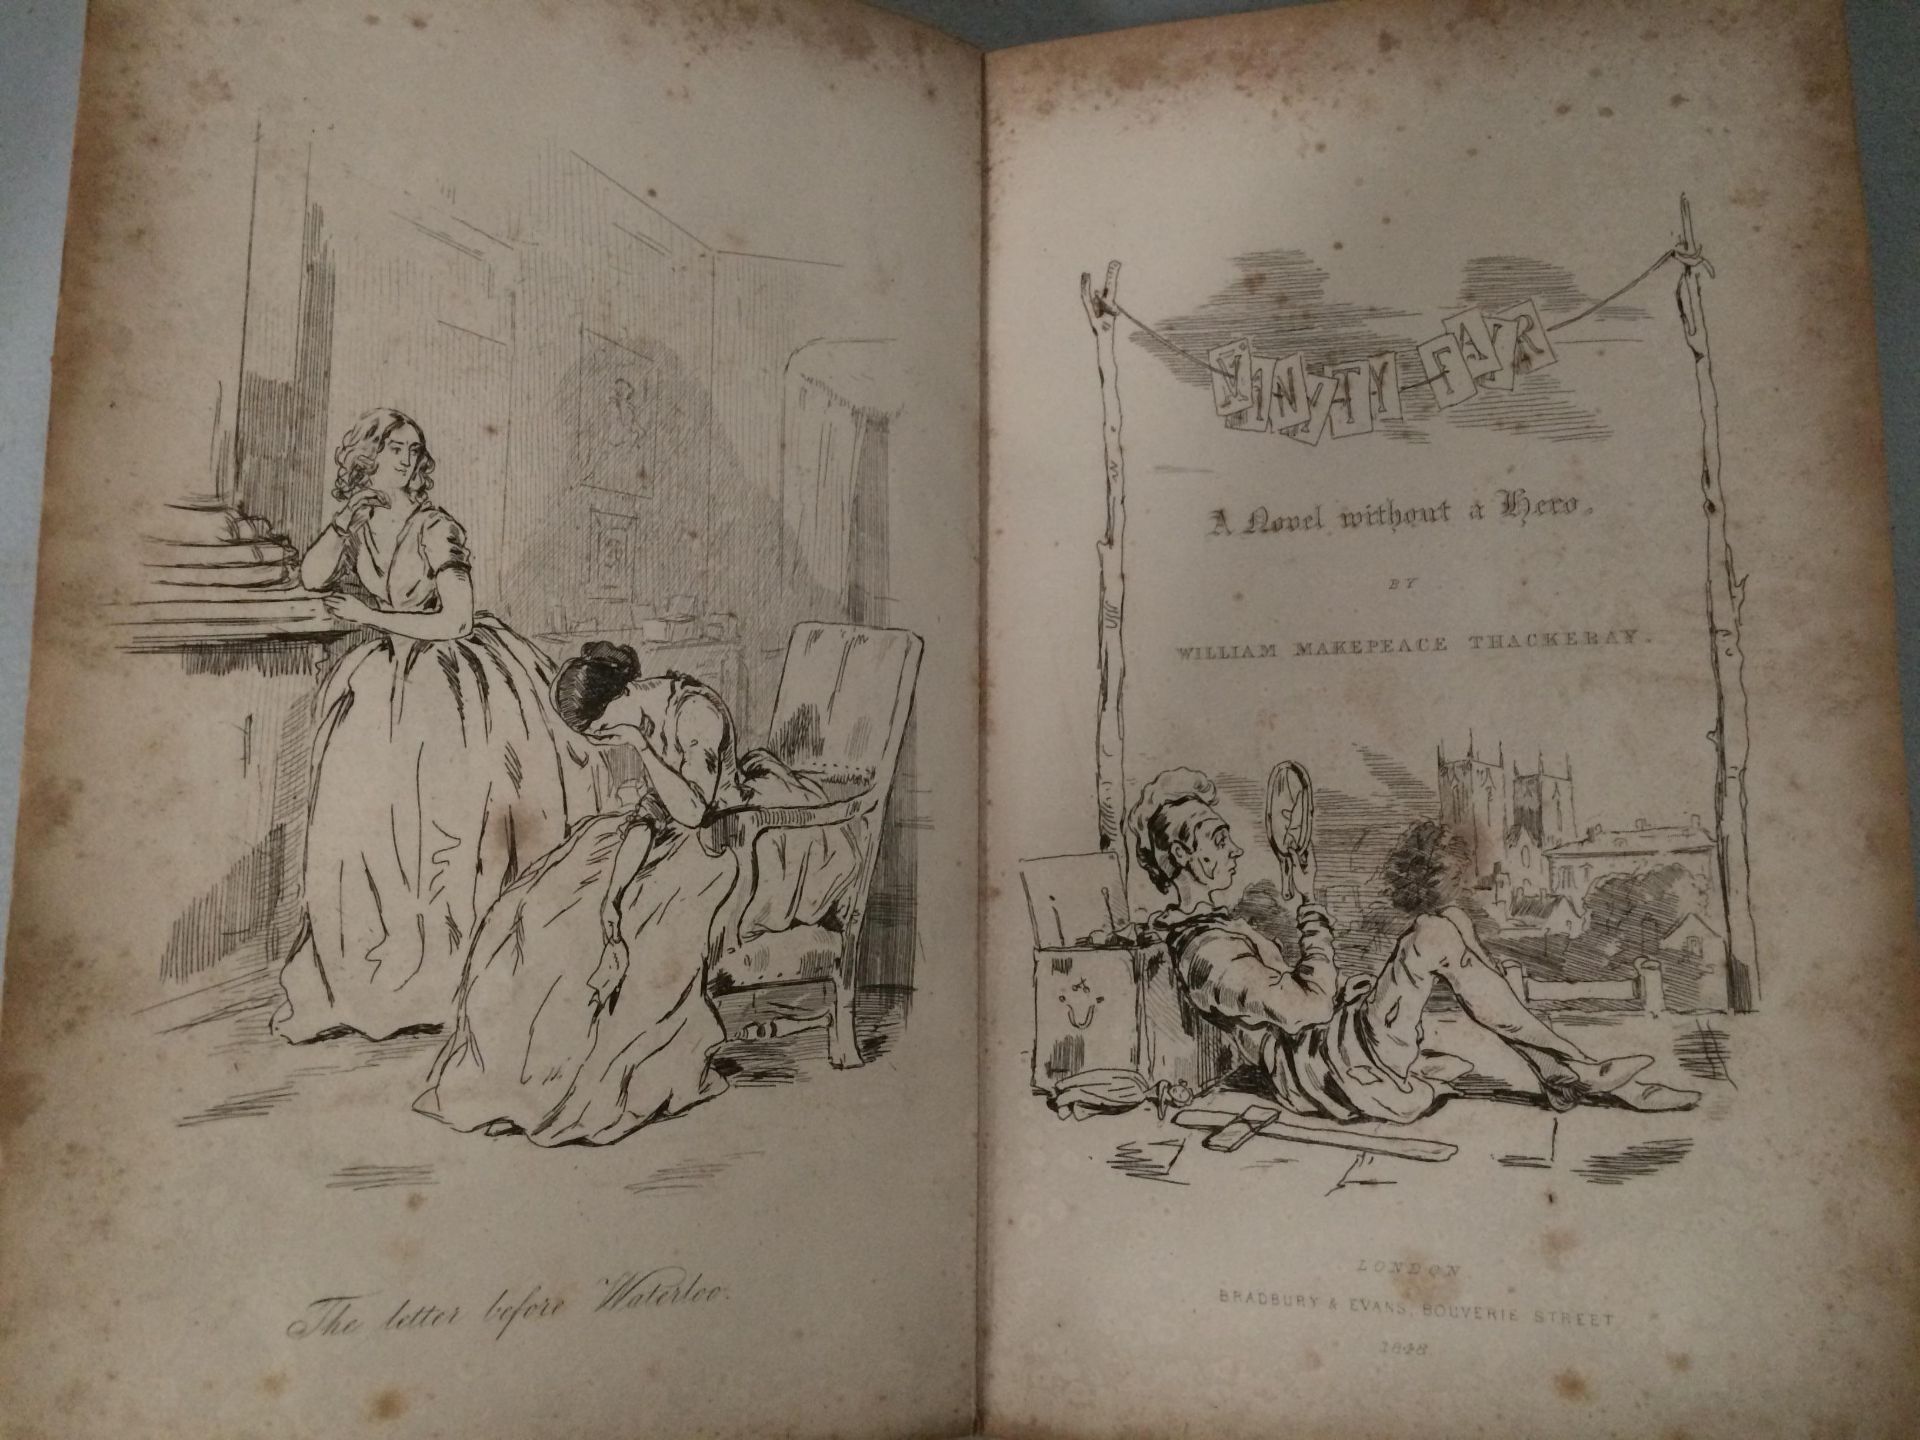 WILLIAM MAKEPEACE THACKERAY VANITY FAIR - a novel without a hero published by Bradbury and Evens, - Image 3 of 4